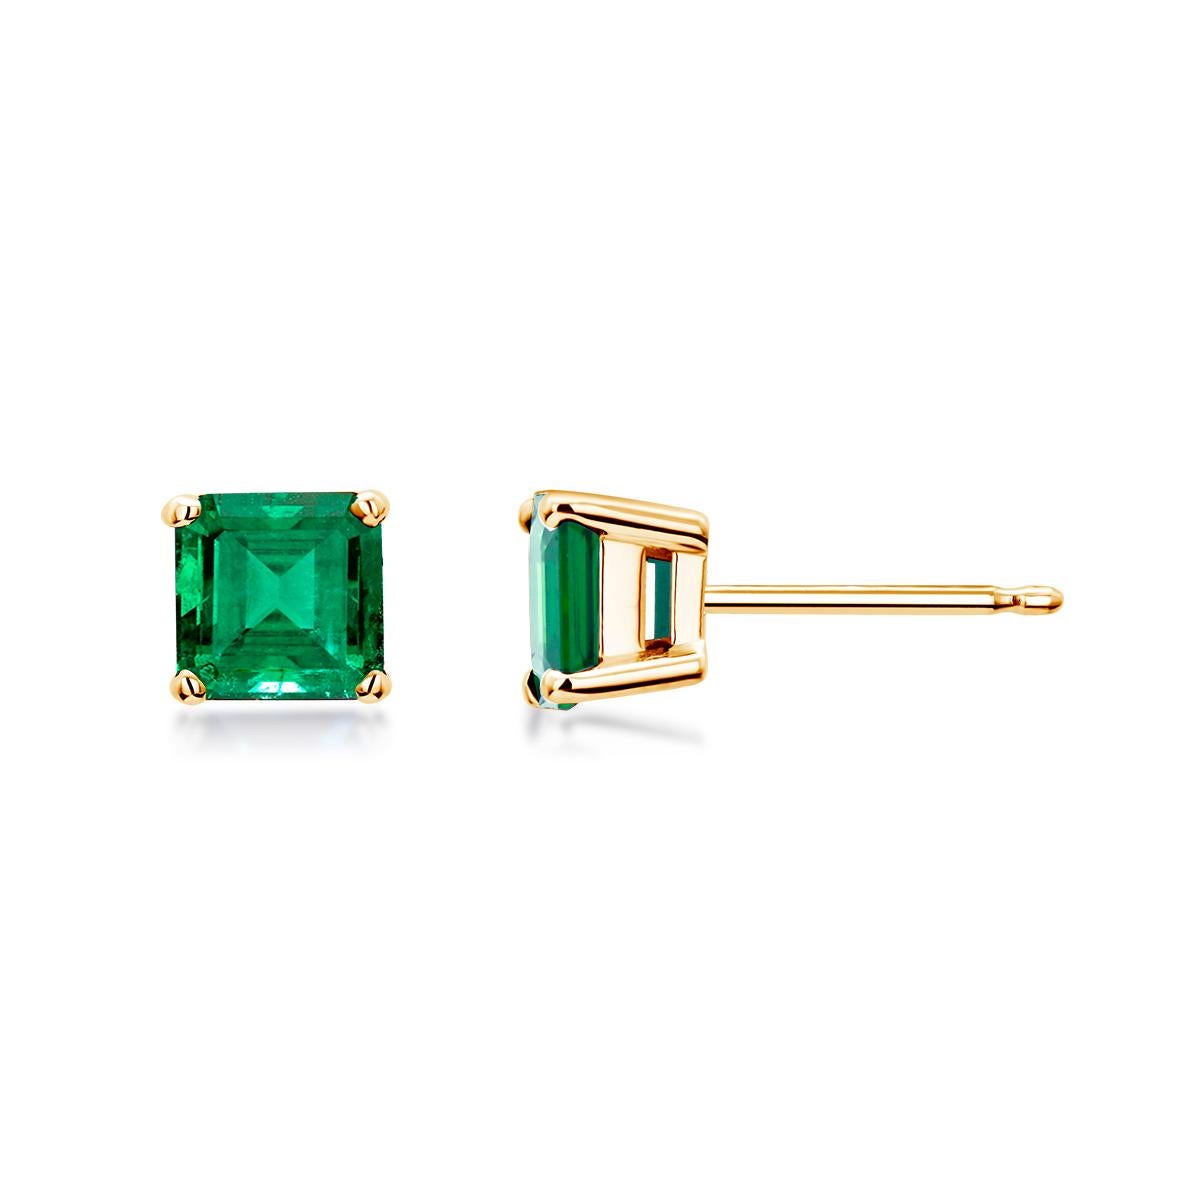 Contemporary Yellow Gold Emerald Cut Colombia Emerald Stud Earrings Weighing 1.10 Carat